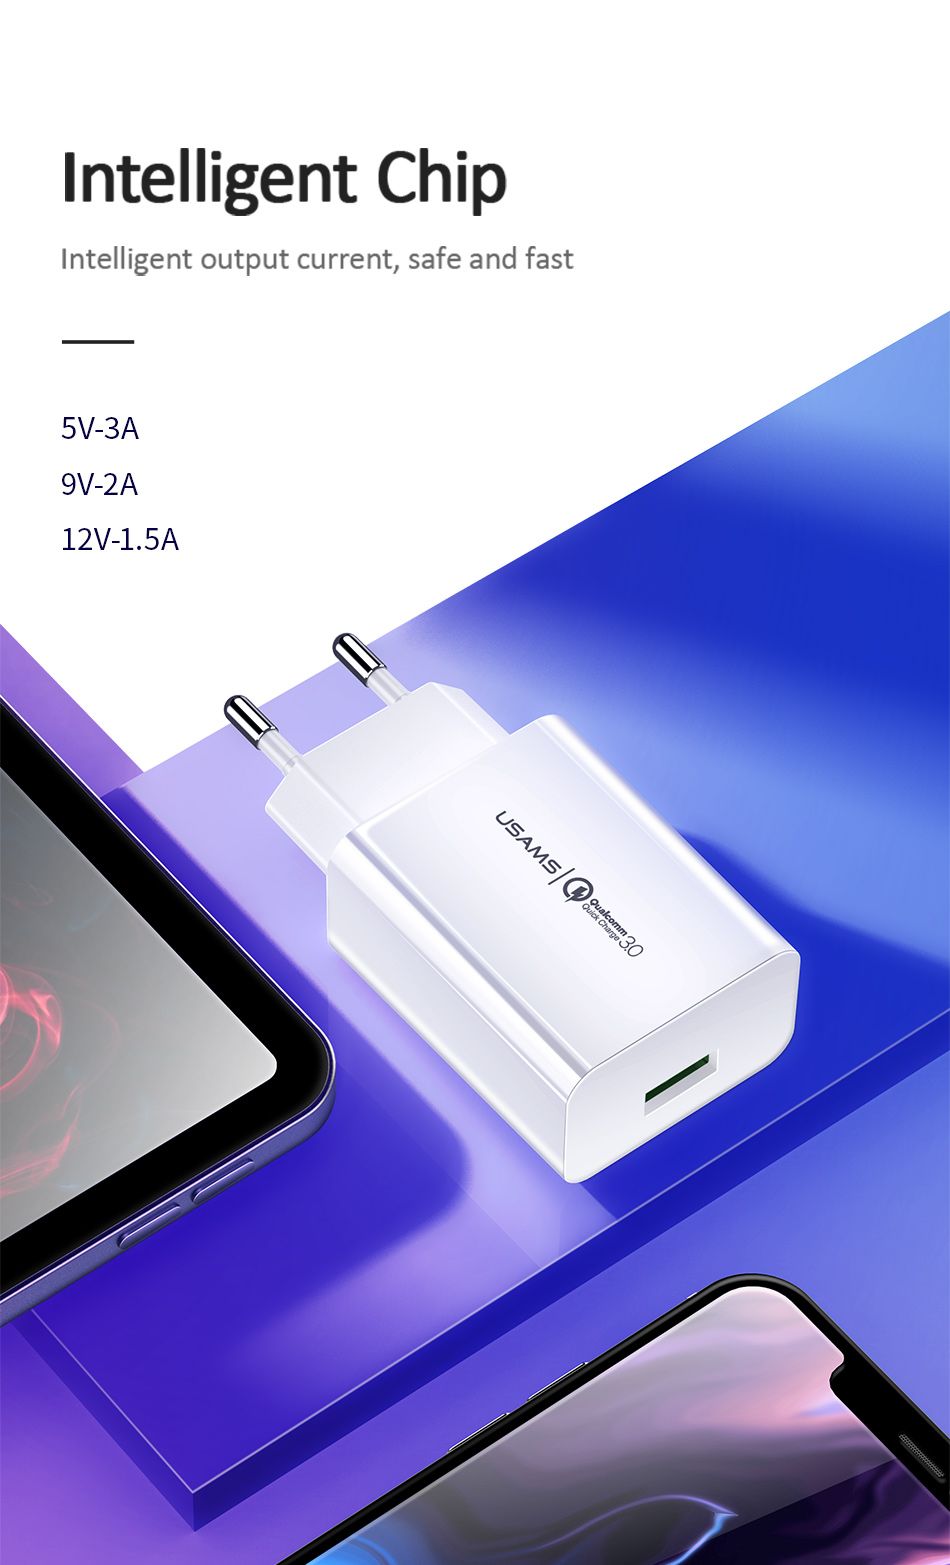 USAMS-18W-Quick-Charge-30-Fast-Charging-USB-Charger-For-iPhone-XS-XR-11-Pro-Huawei-P30-Pro-Mate-30-M-1582613